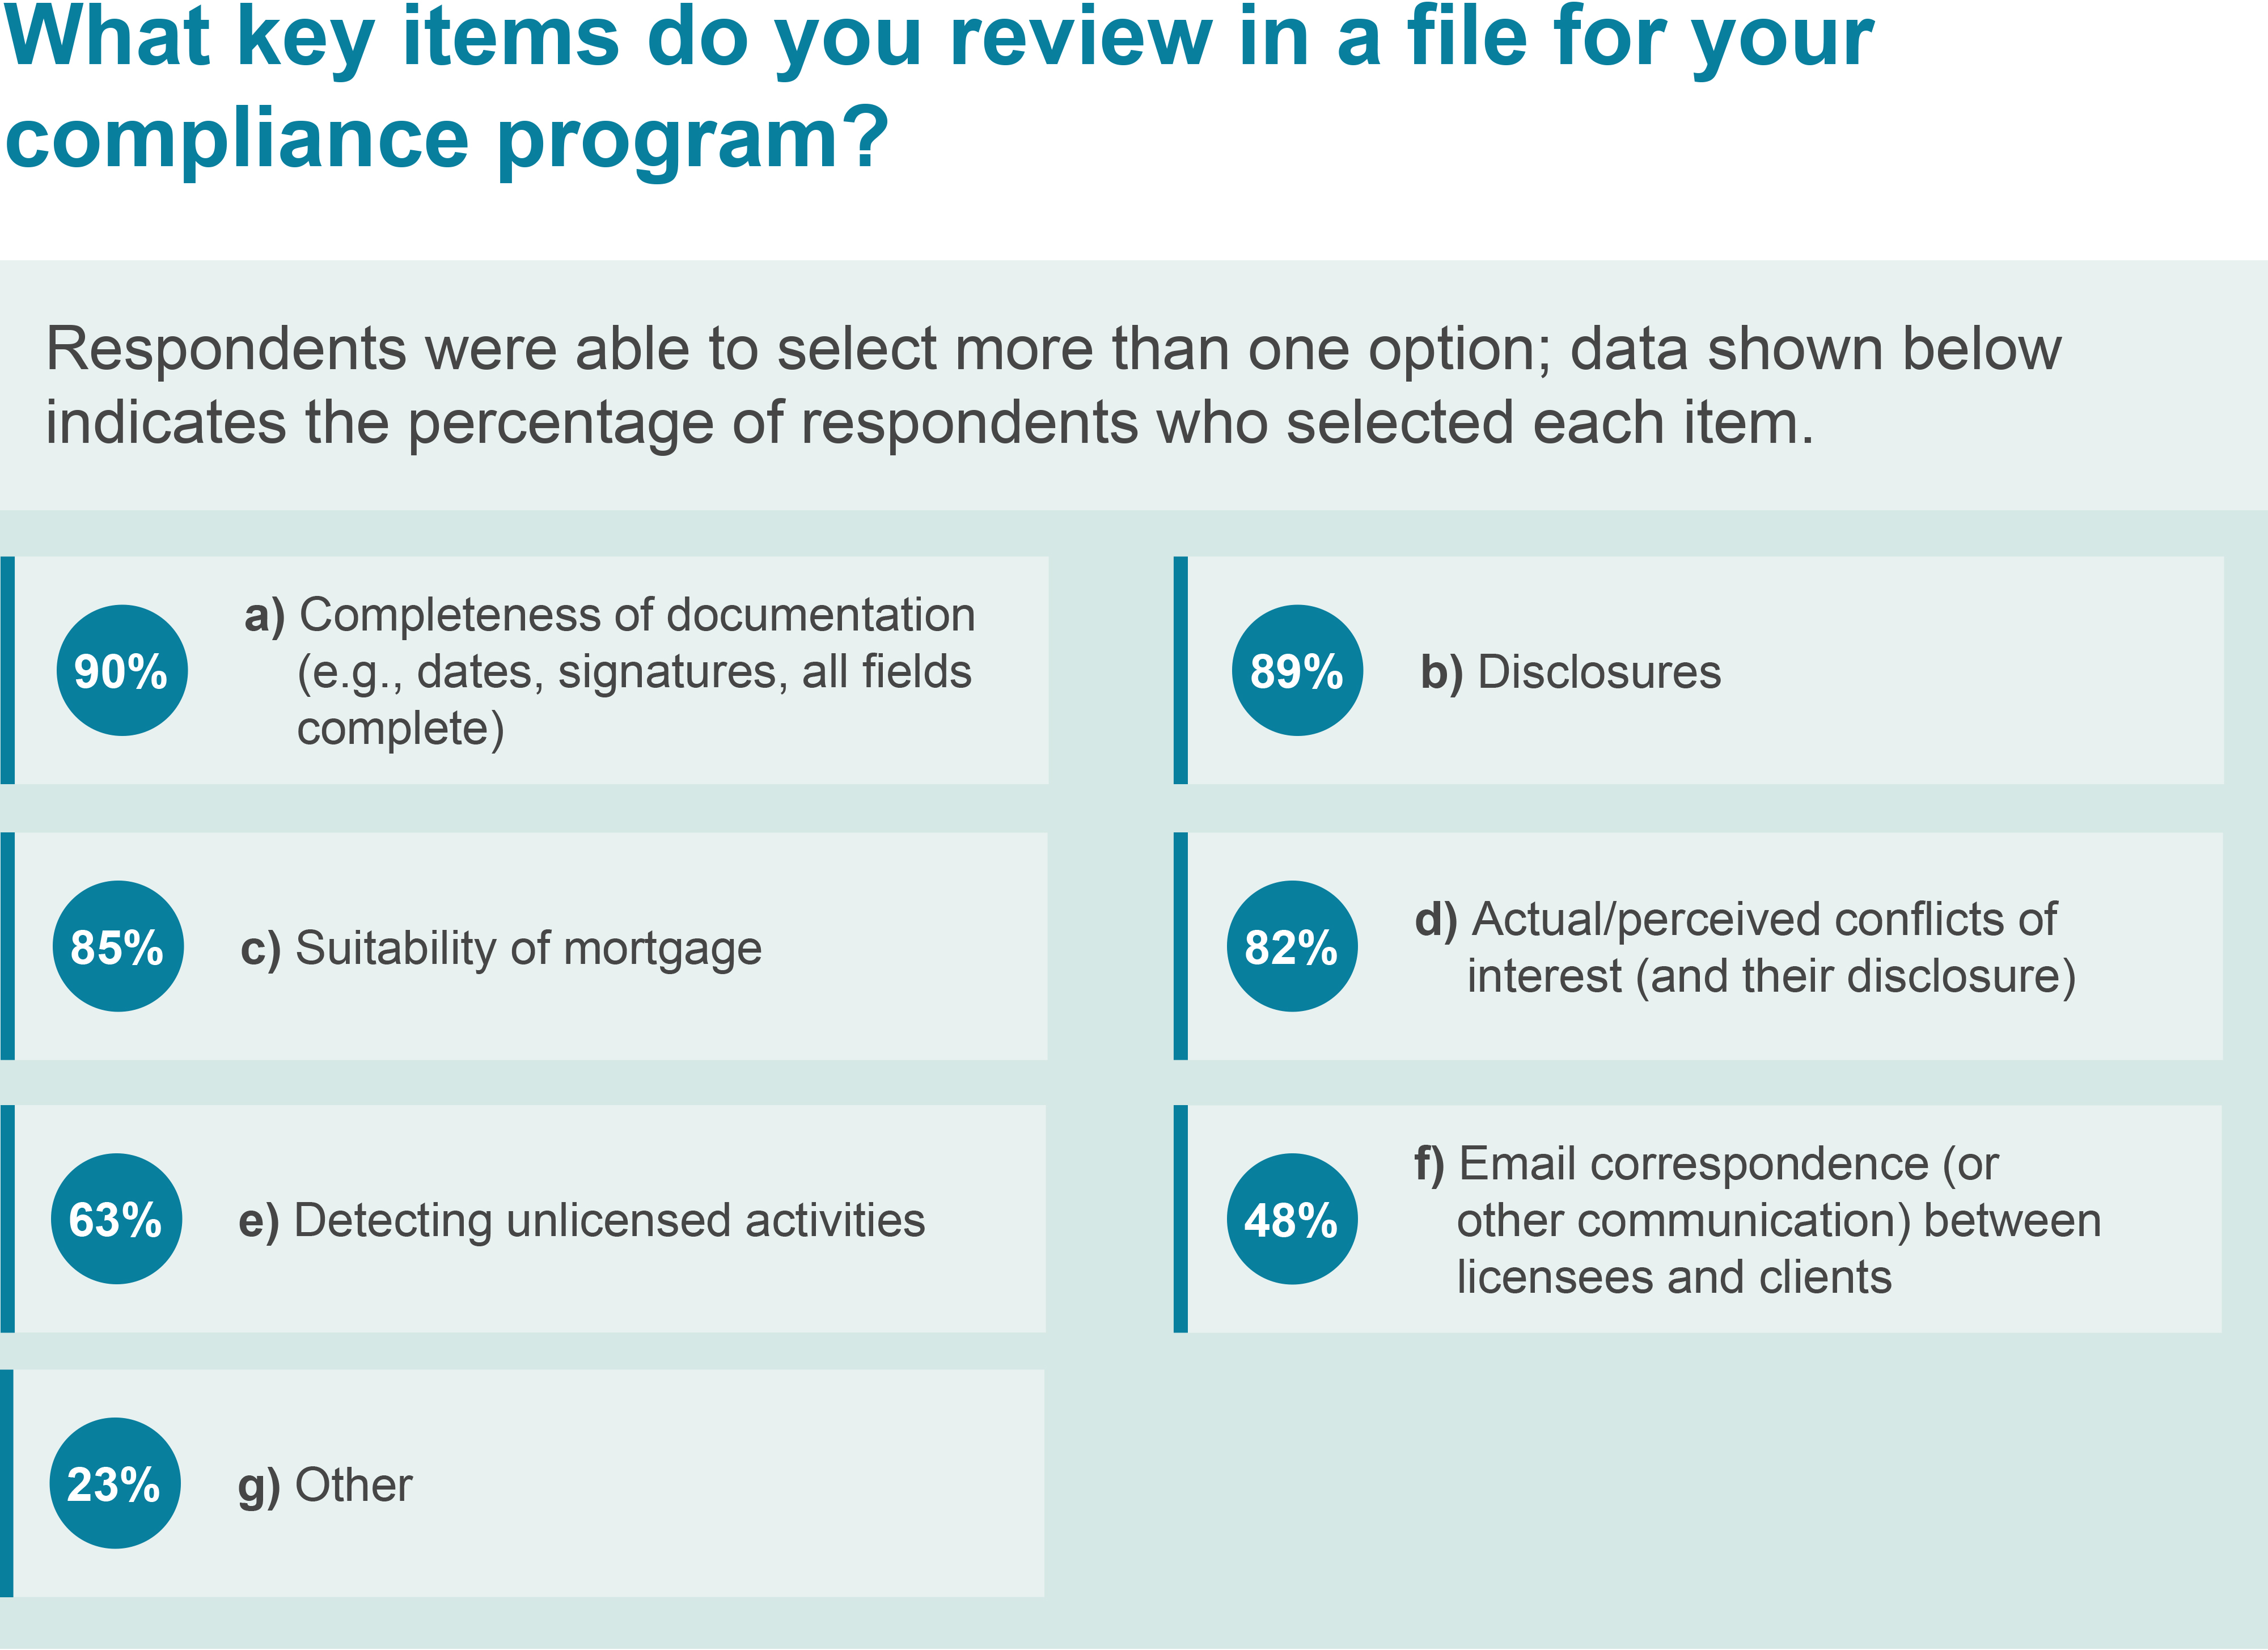 Figure 2: What key items do you review in a file for your compliance program